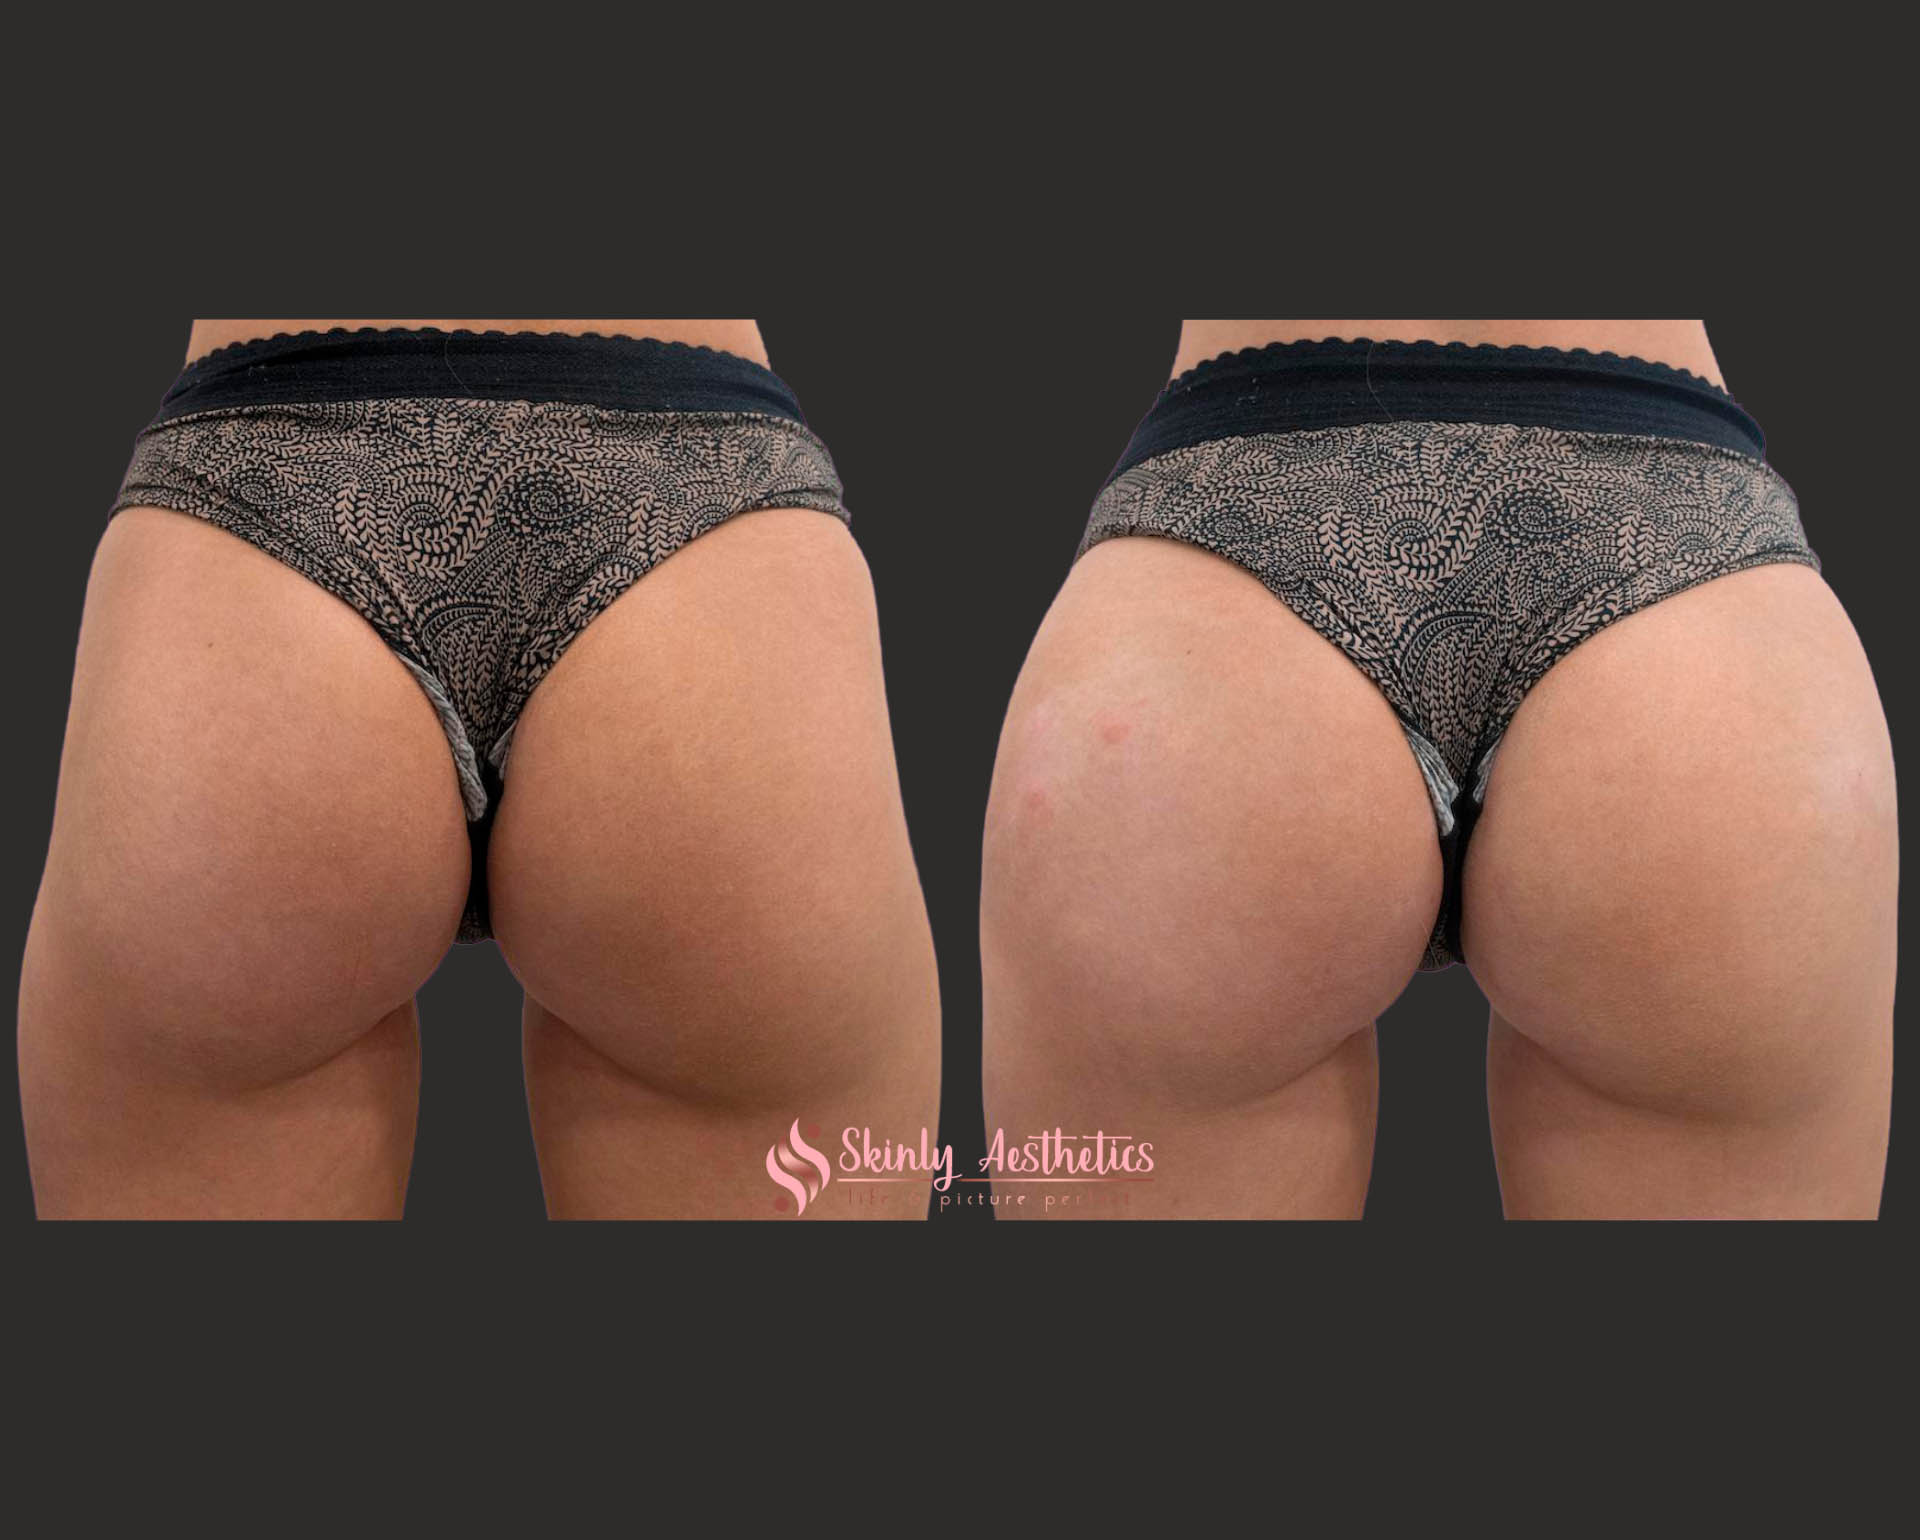 before and after results of non-surgical butt lift with Sculptra filler